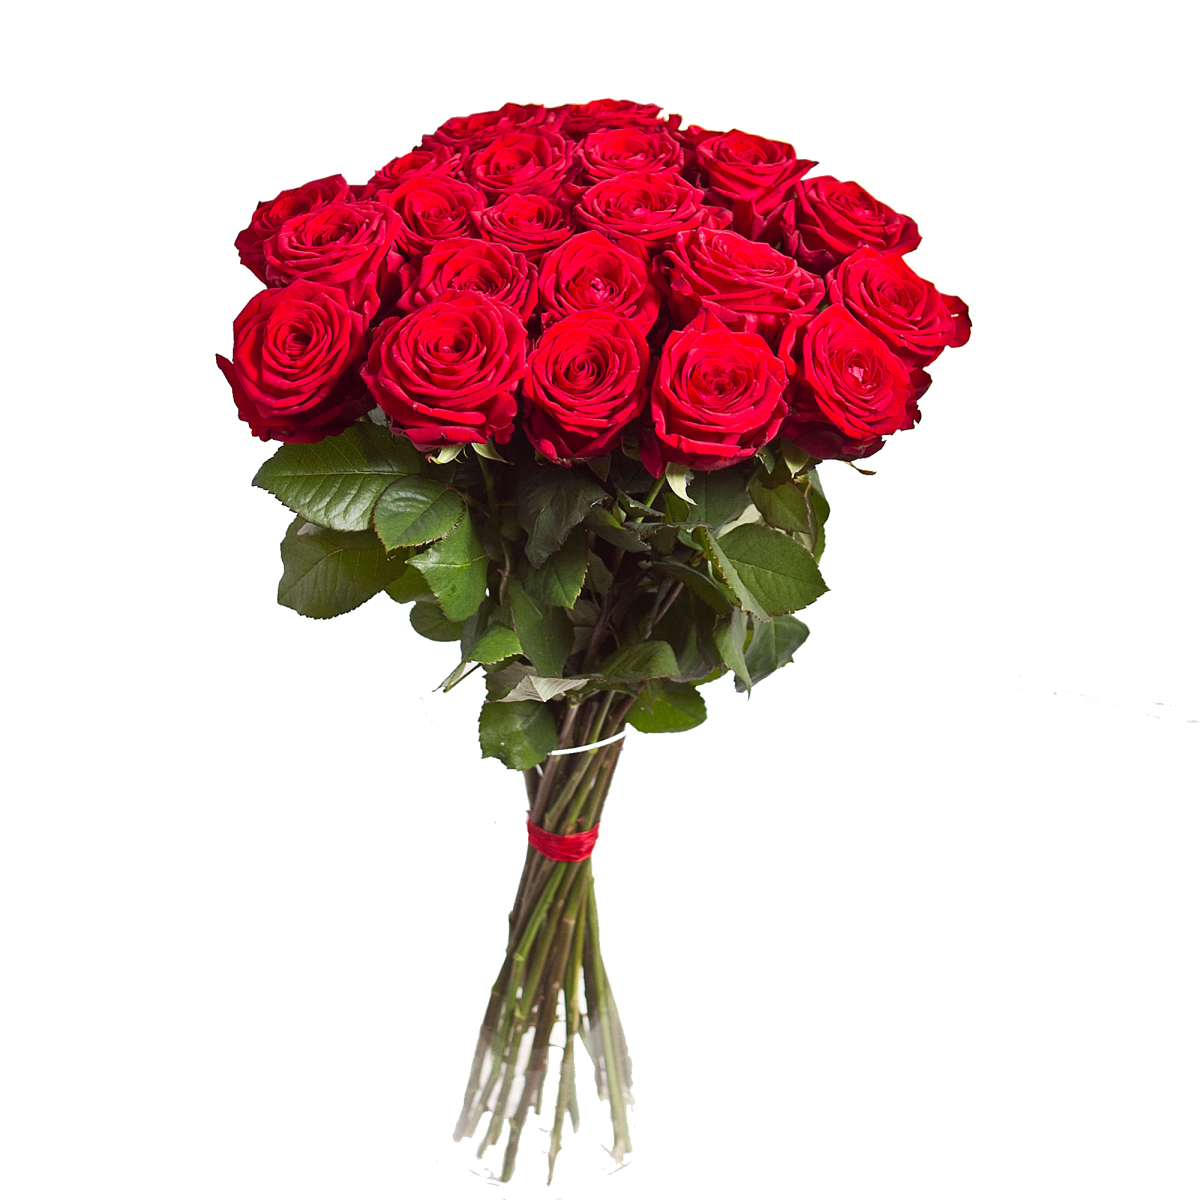 Rose Flowers PNG HD Quality